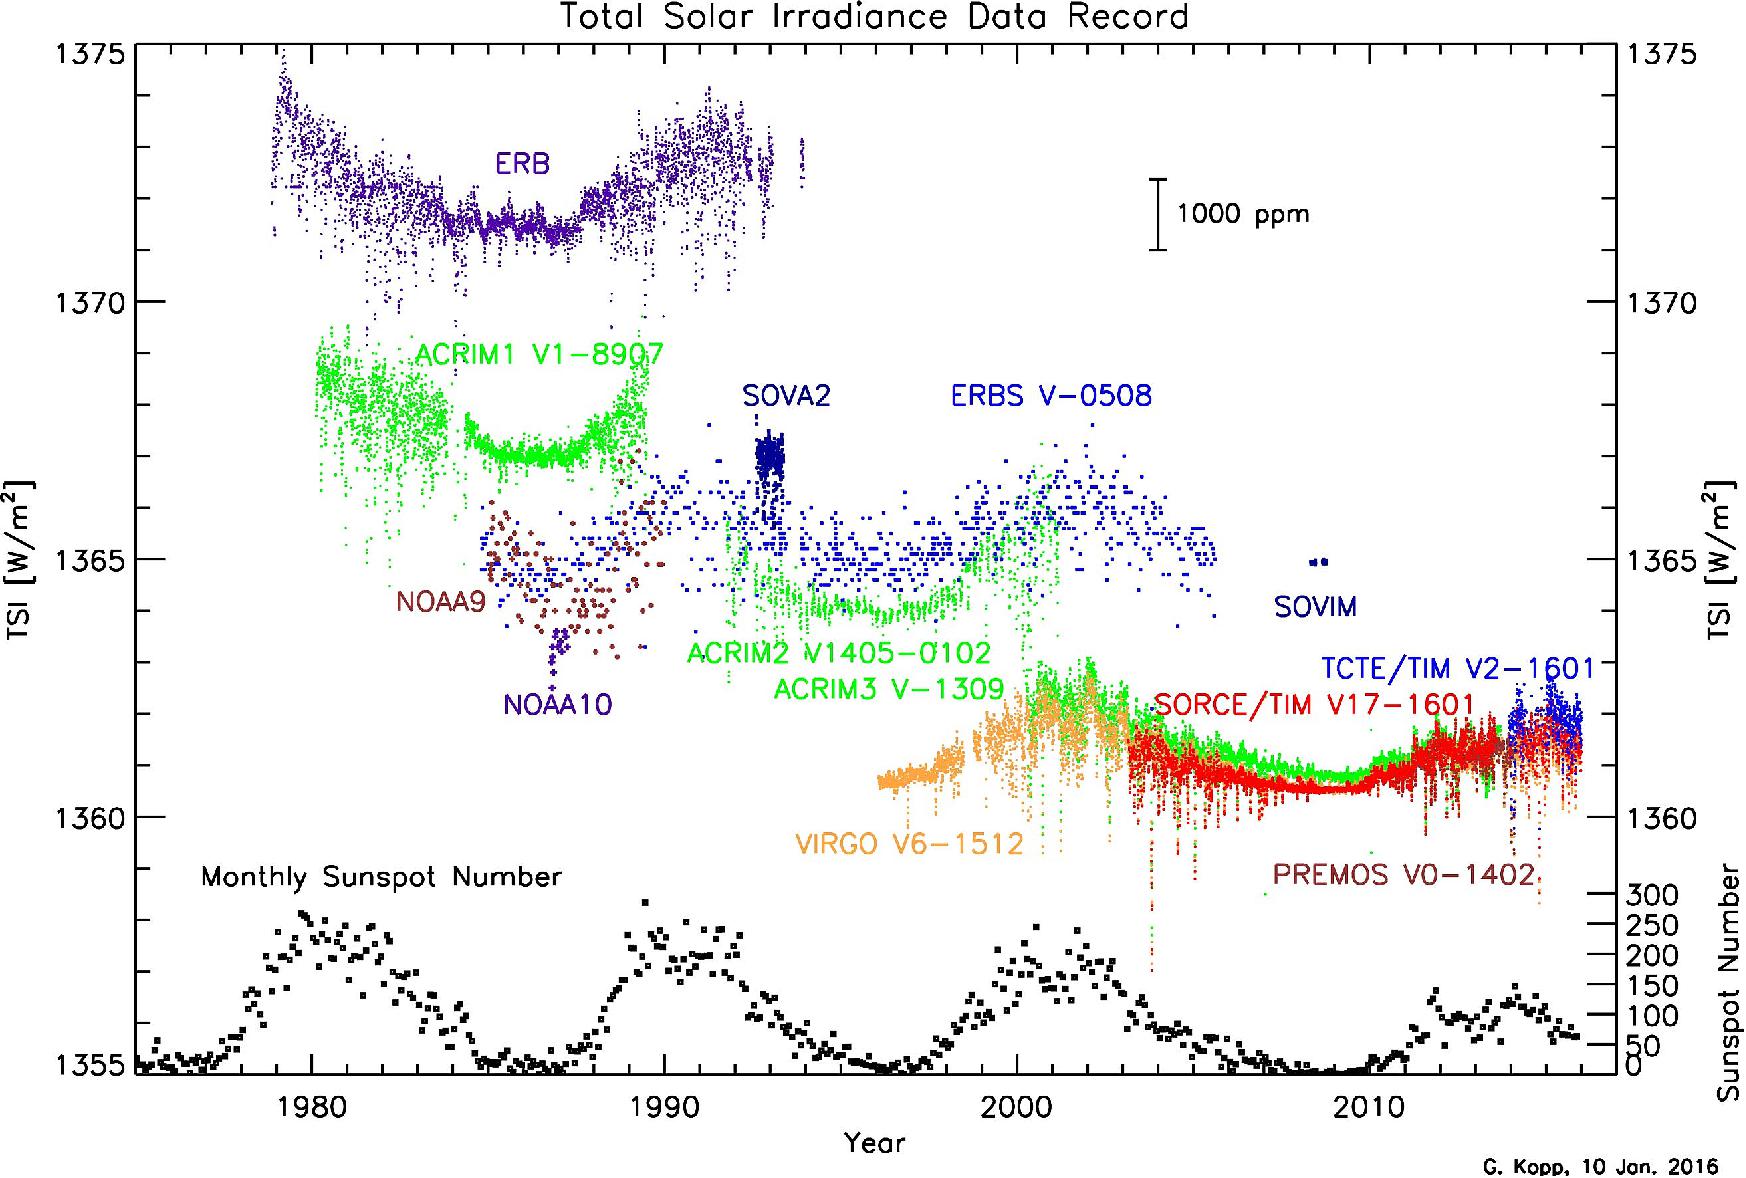 Figure 5: The TSI Climate Data Record now spans 36 years. Instrument offsets are unresolved calibration differences, much of which are due to internal instrument scatter (image credit: CU/LASP)